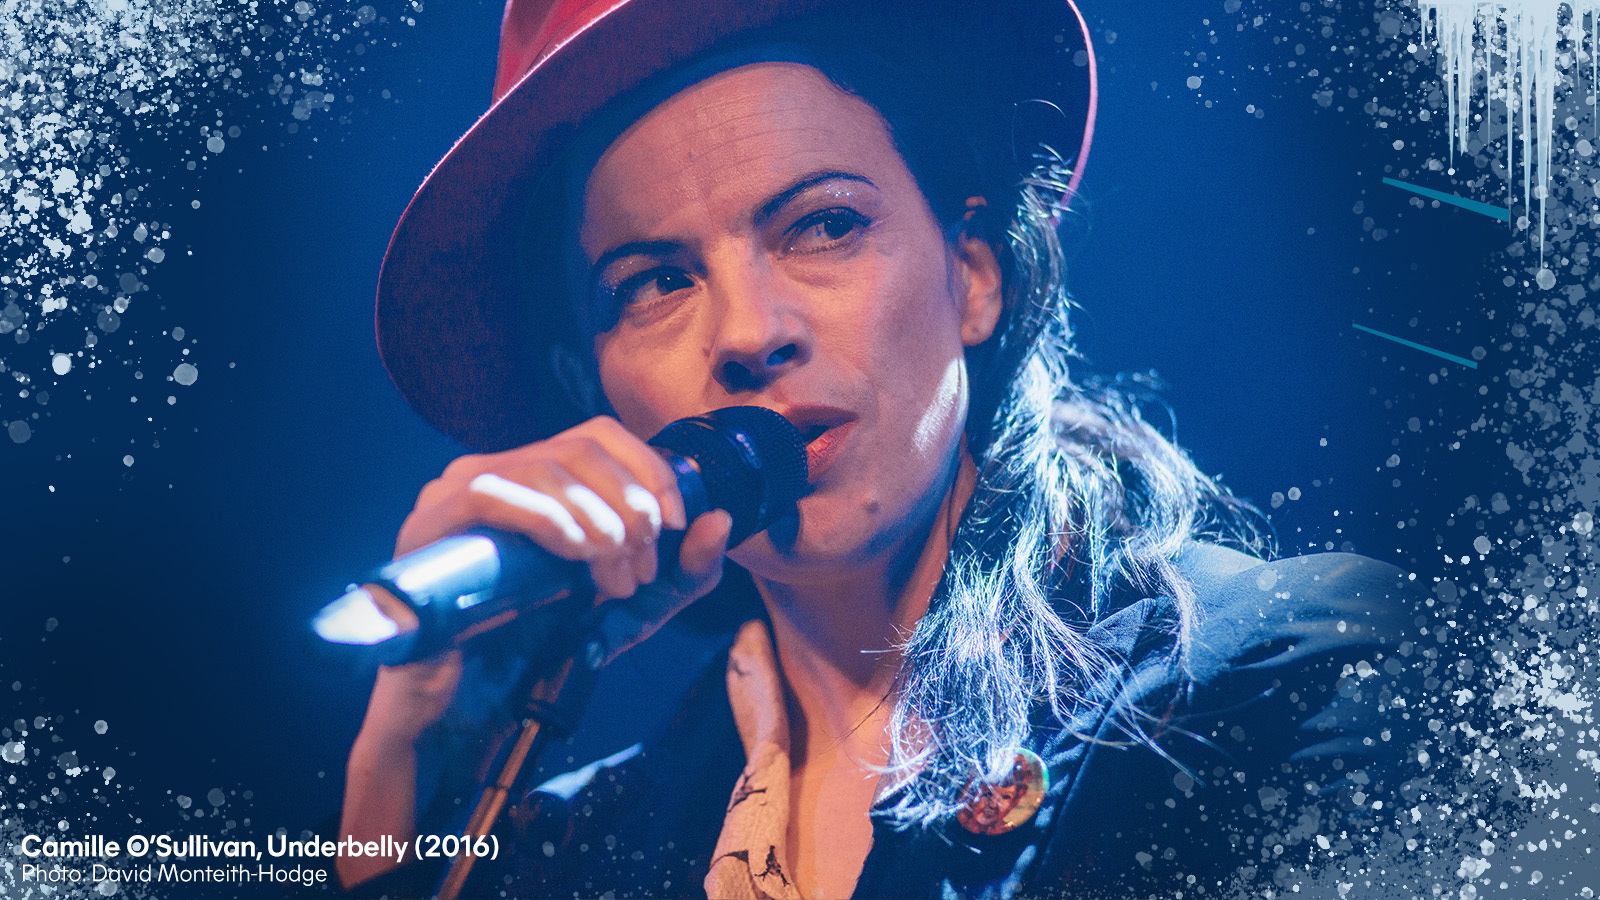 Camille O'Sullivan performing at Underbelly in 2016.